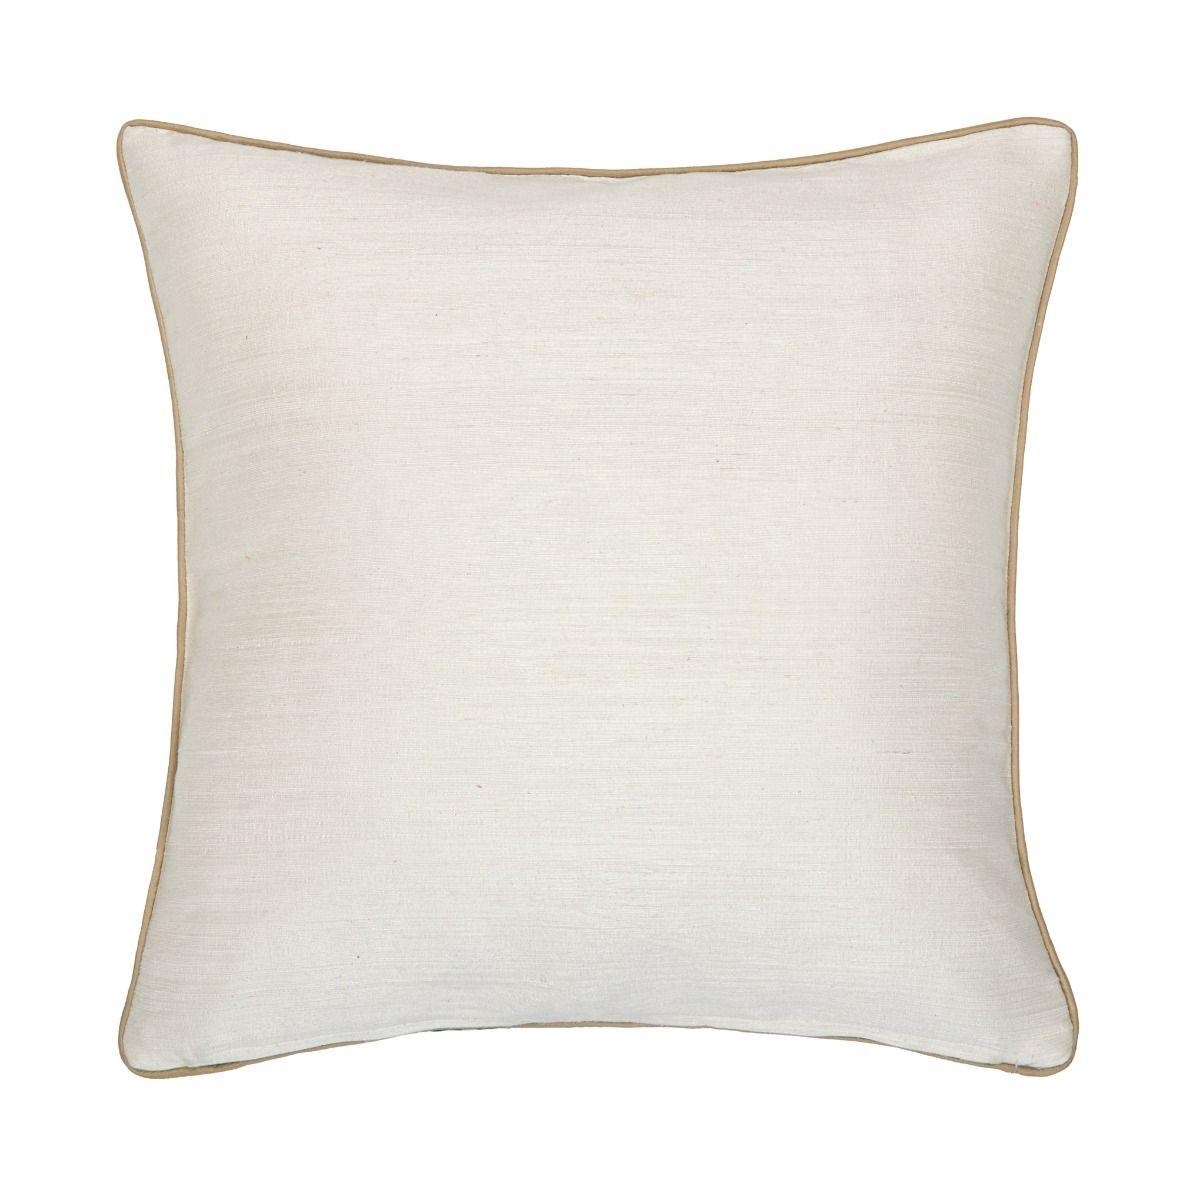 Heliconia Dreamin Cushion Cover 18" - Beige